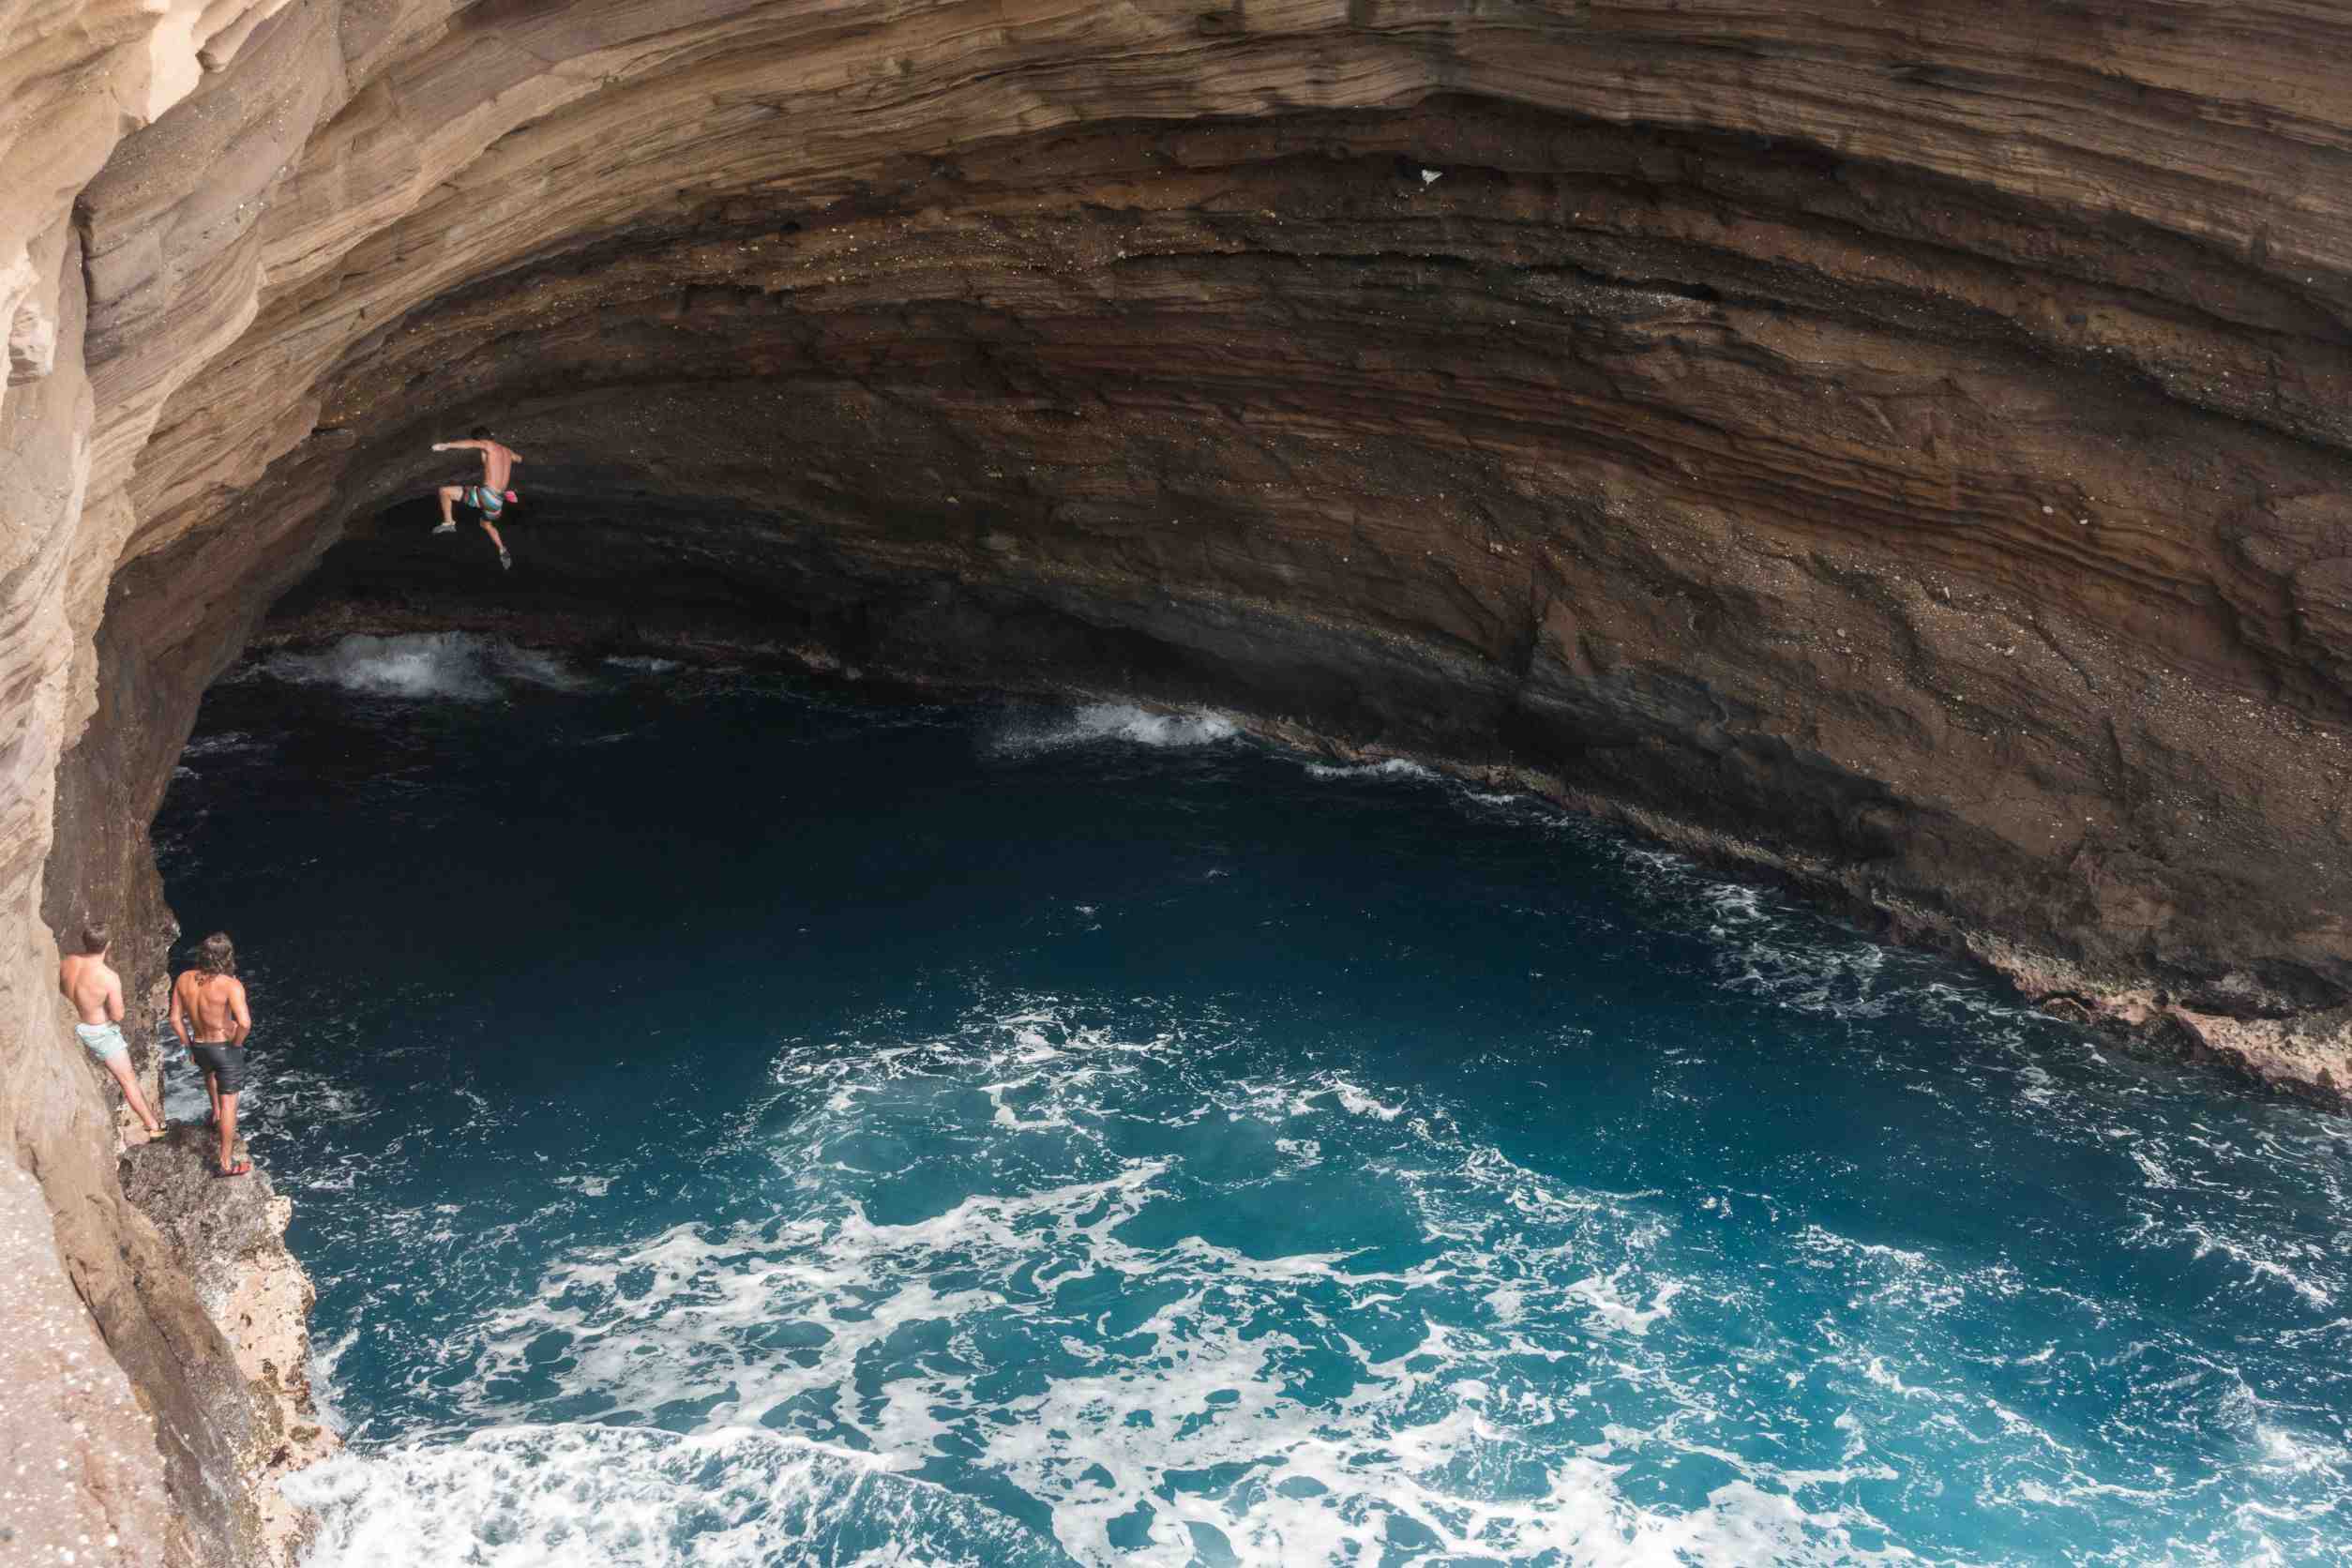 Climbing in a surfer's paradise: Hawaii.